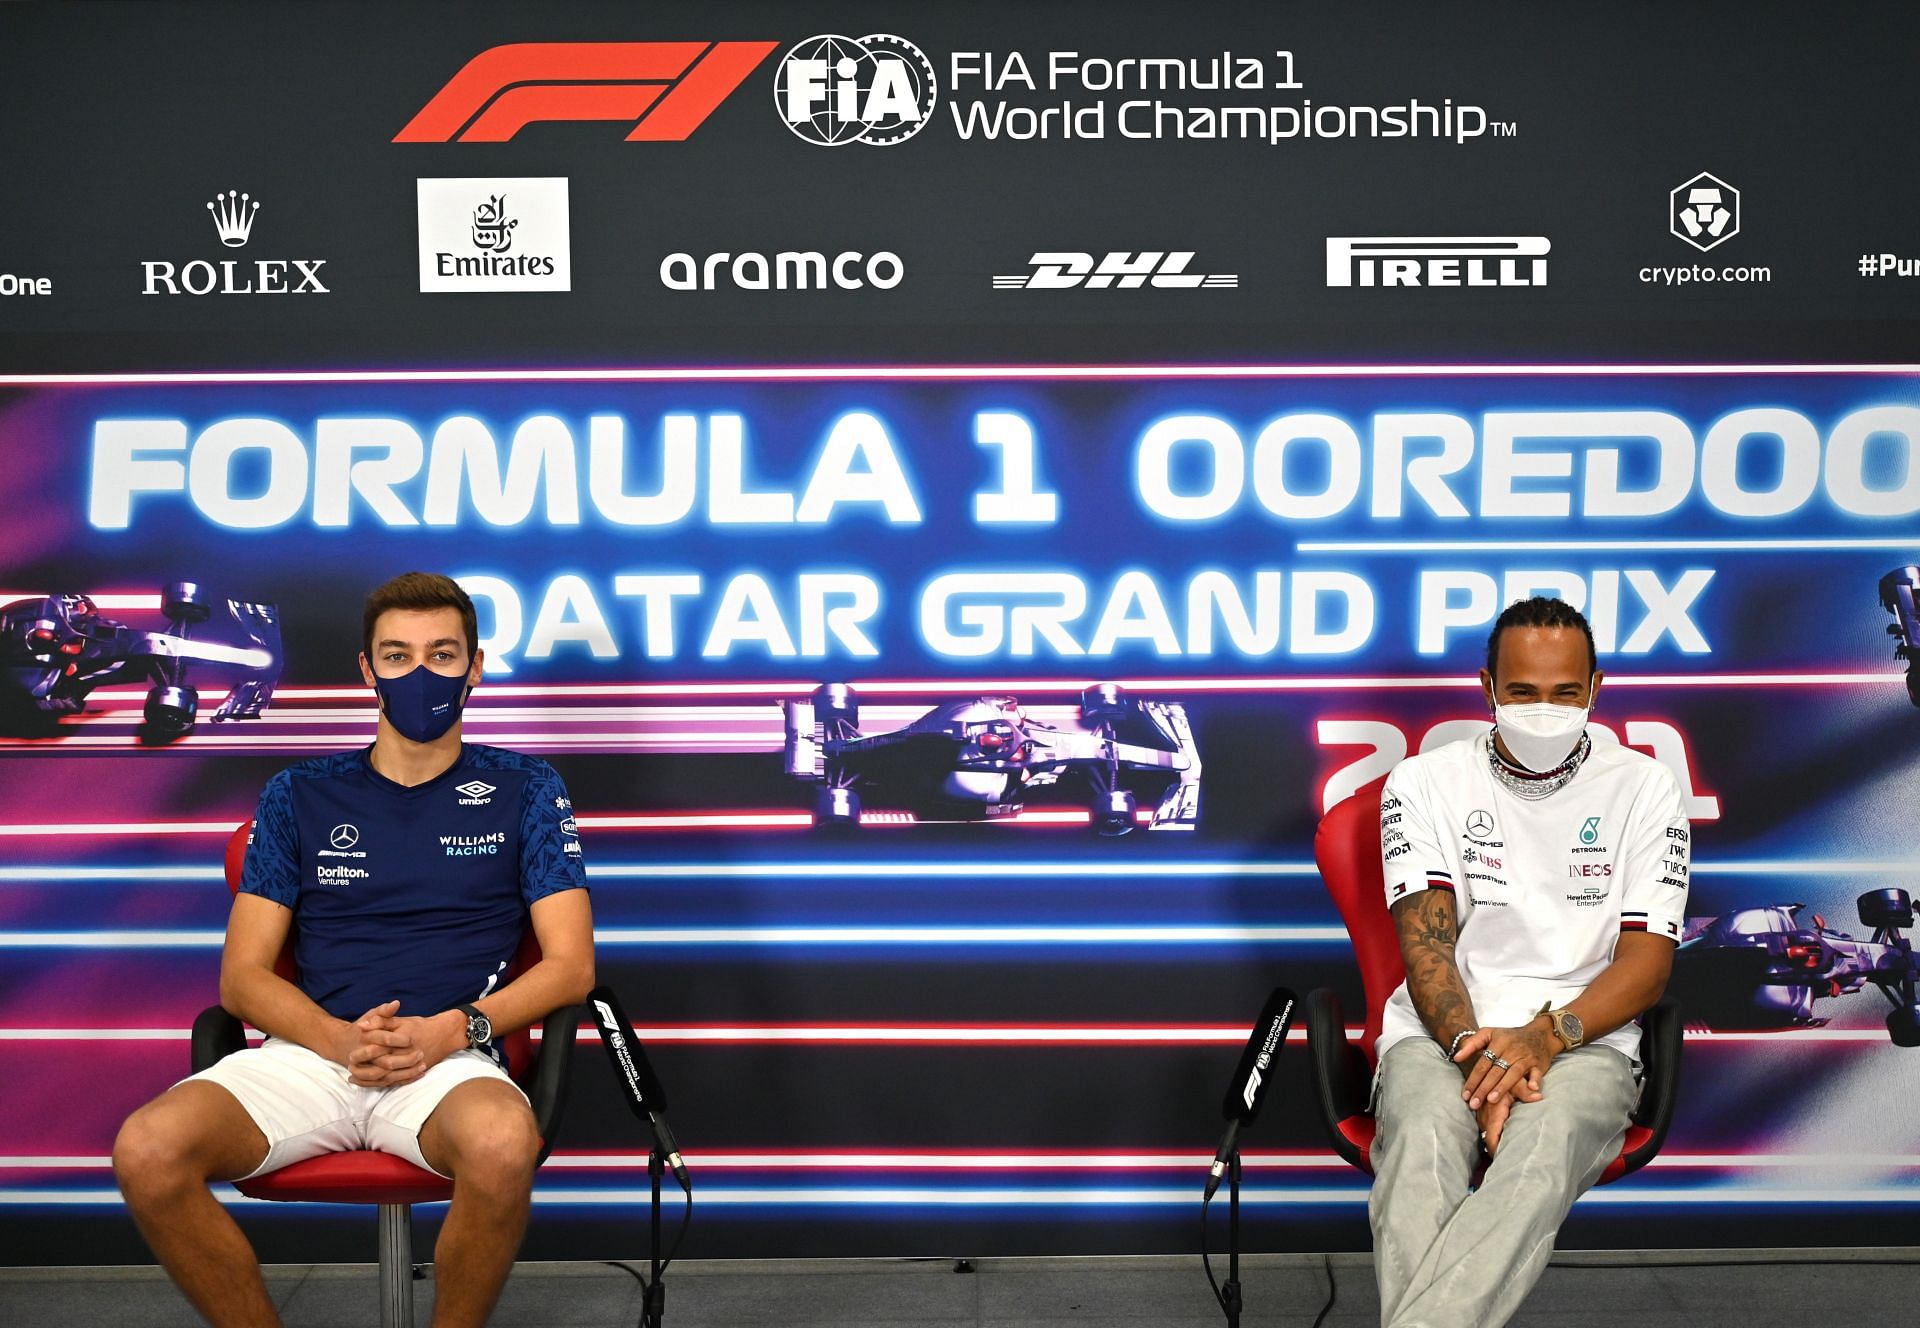 F1 Grand Prix of Qatar - George Russell (left) and Lewis Hamilton (right) attend a press conference (Photo by Andrej Isakovic - Pool/Getty Images)